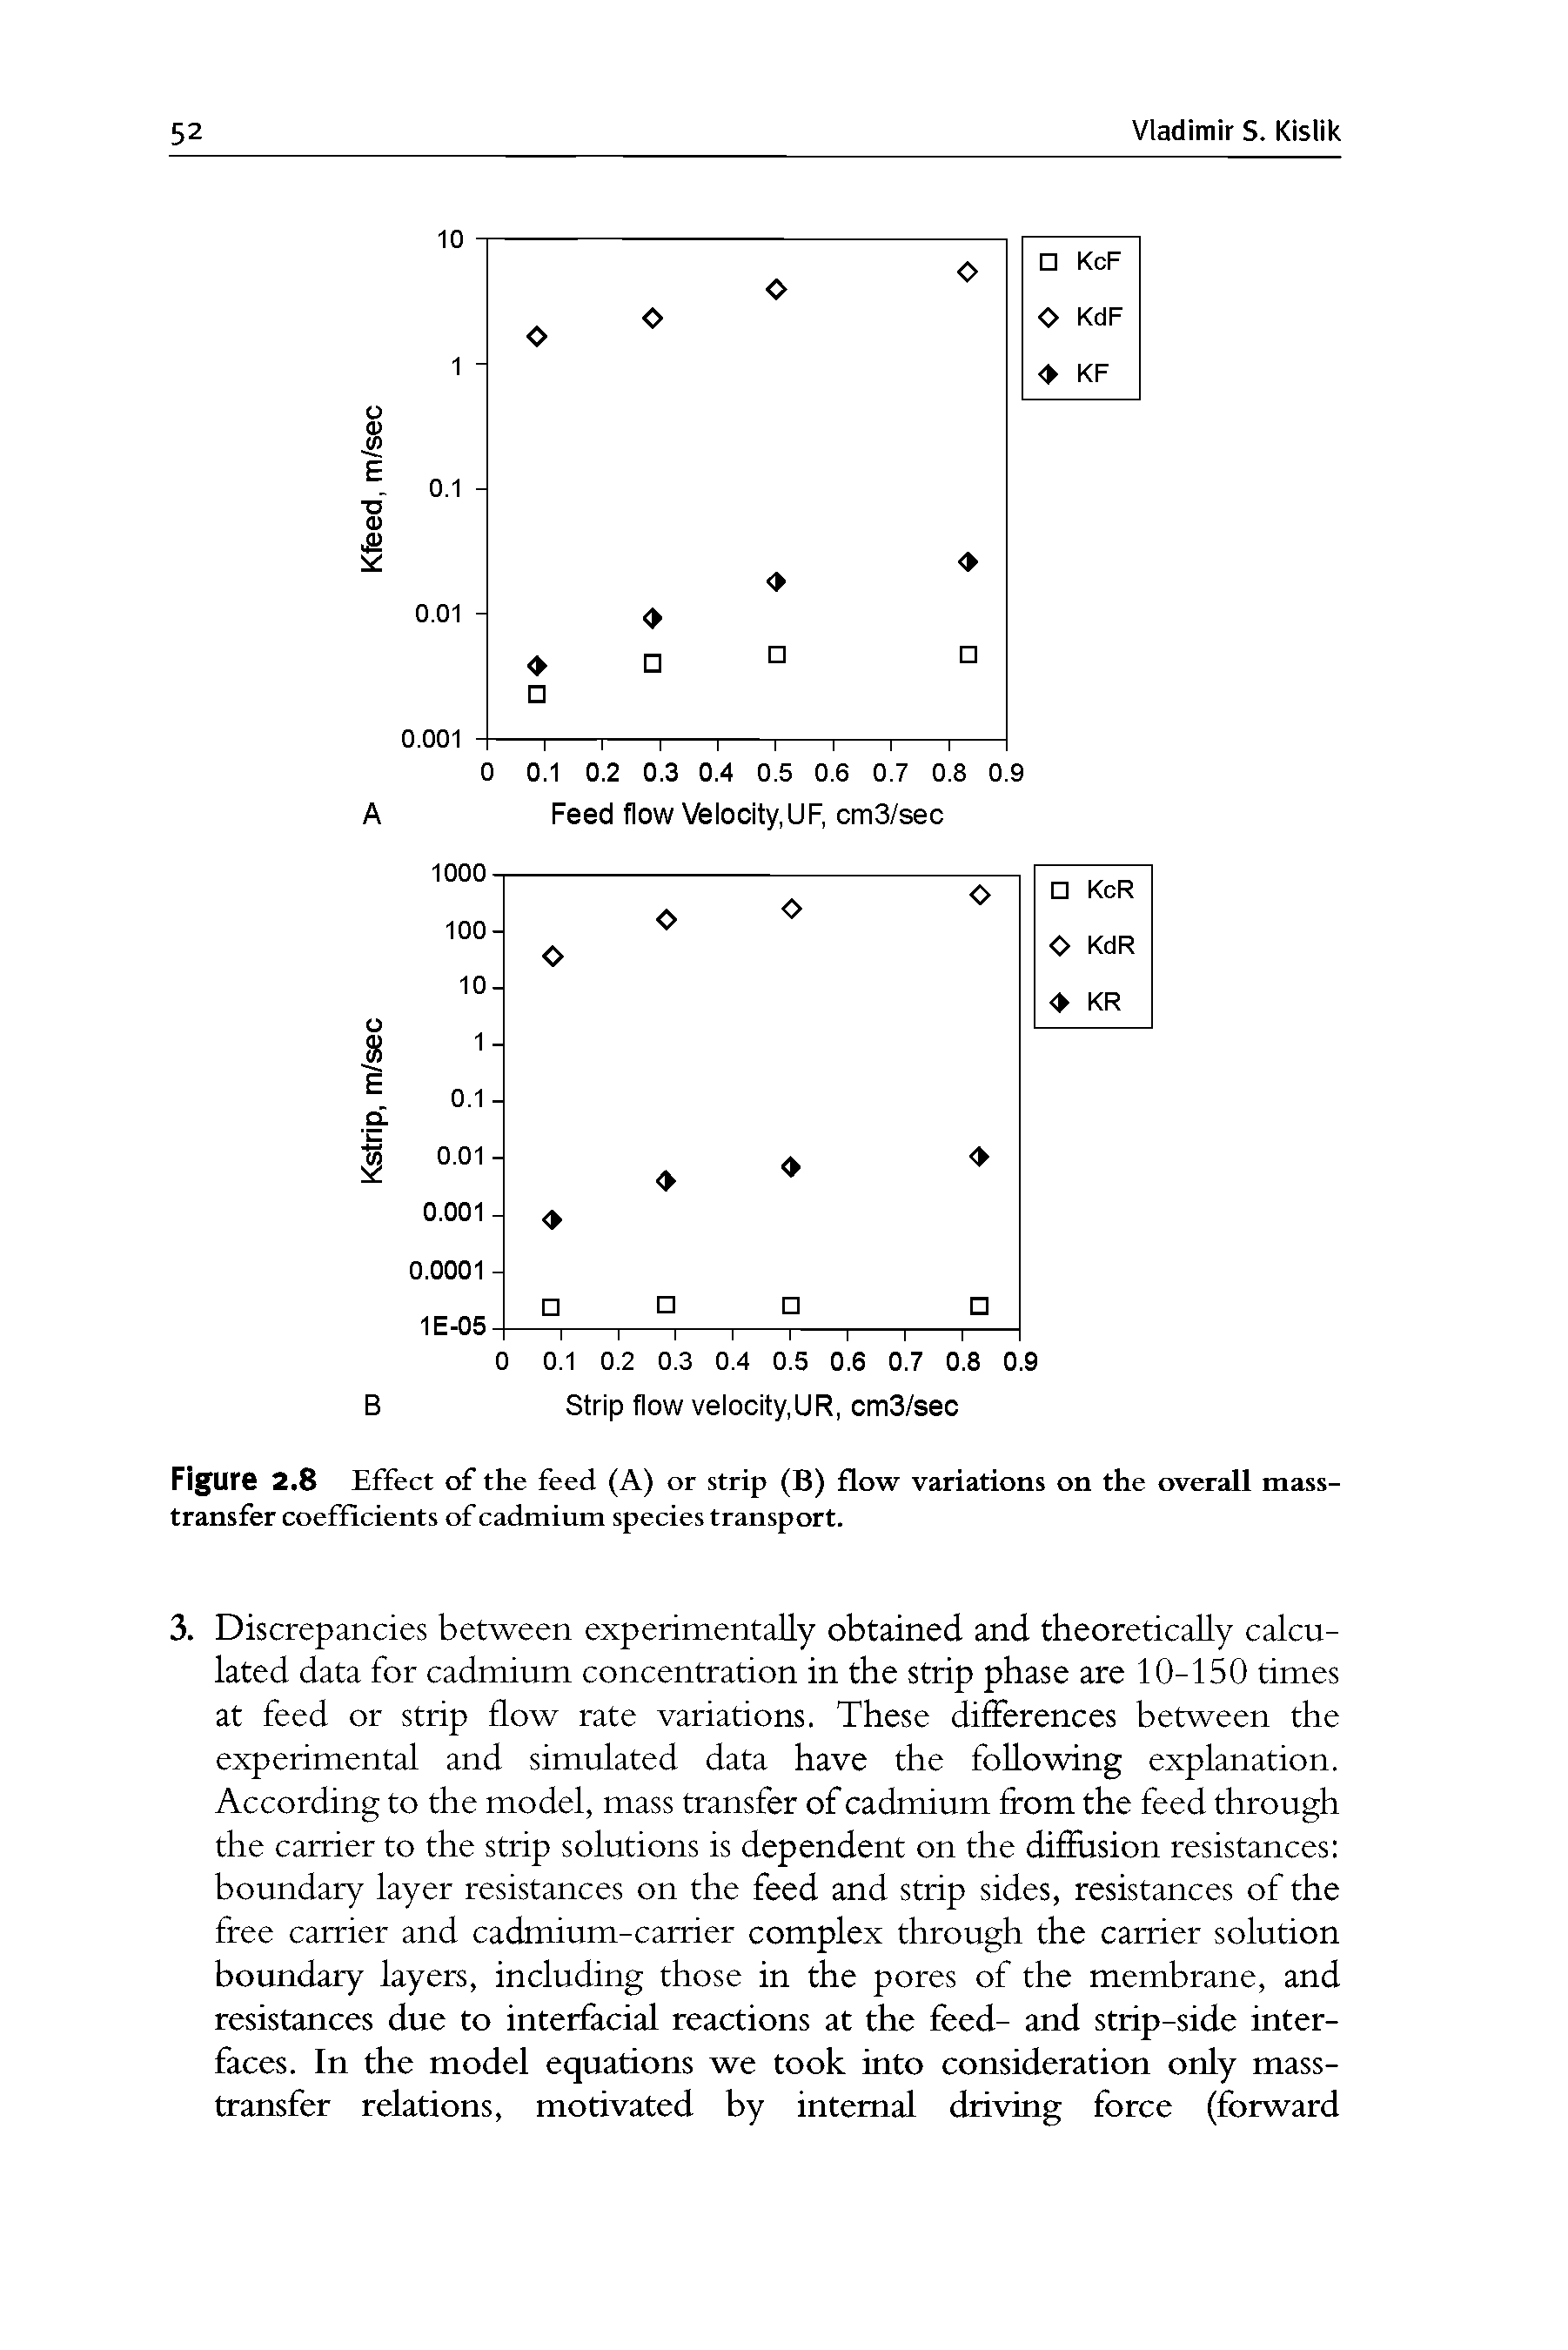 Figure 2.8 Effect of the feed (A) or strip (B) flow variations on the overall mass-transfer coefficients of cadmium species transport.